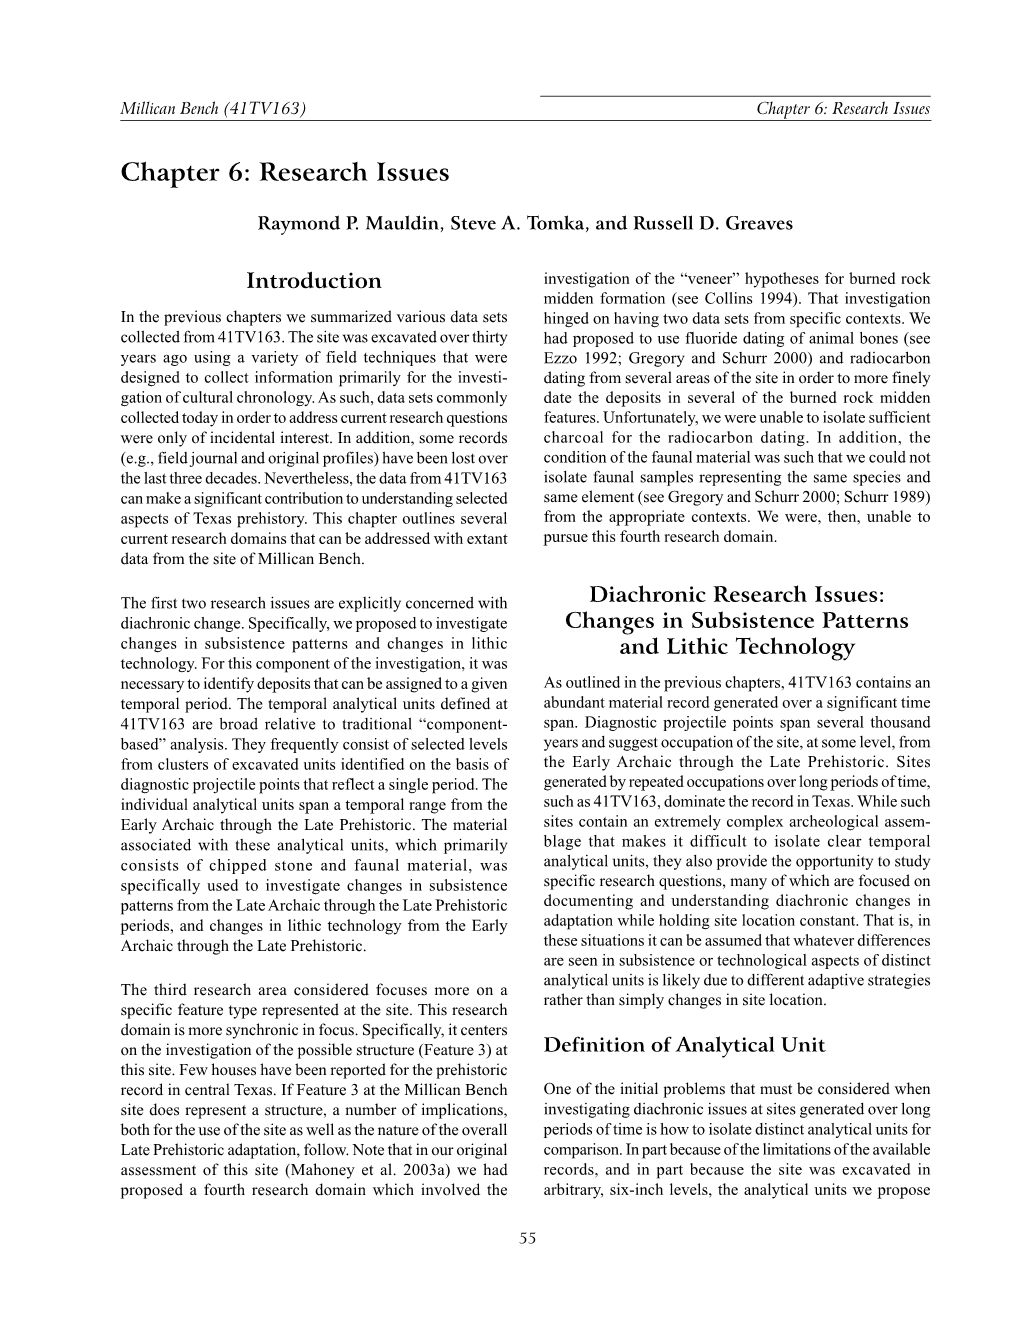 06-Chap 6 Research Issues.P65